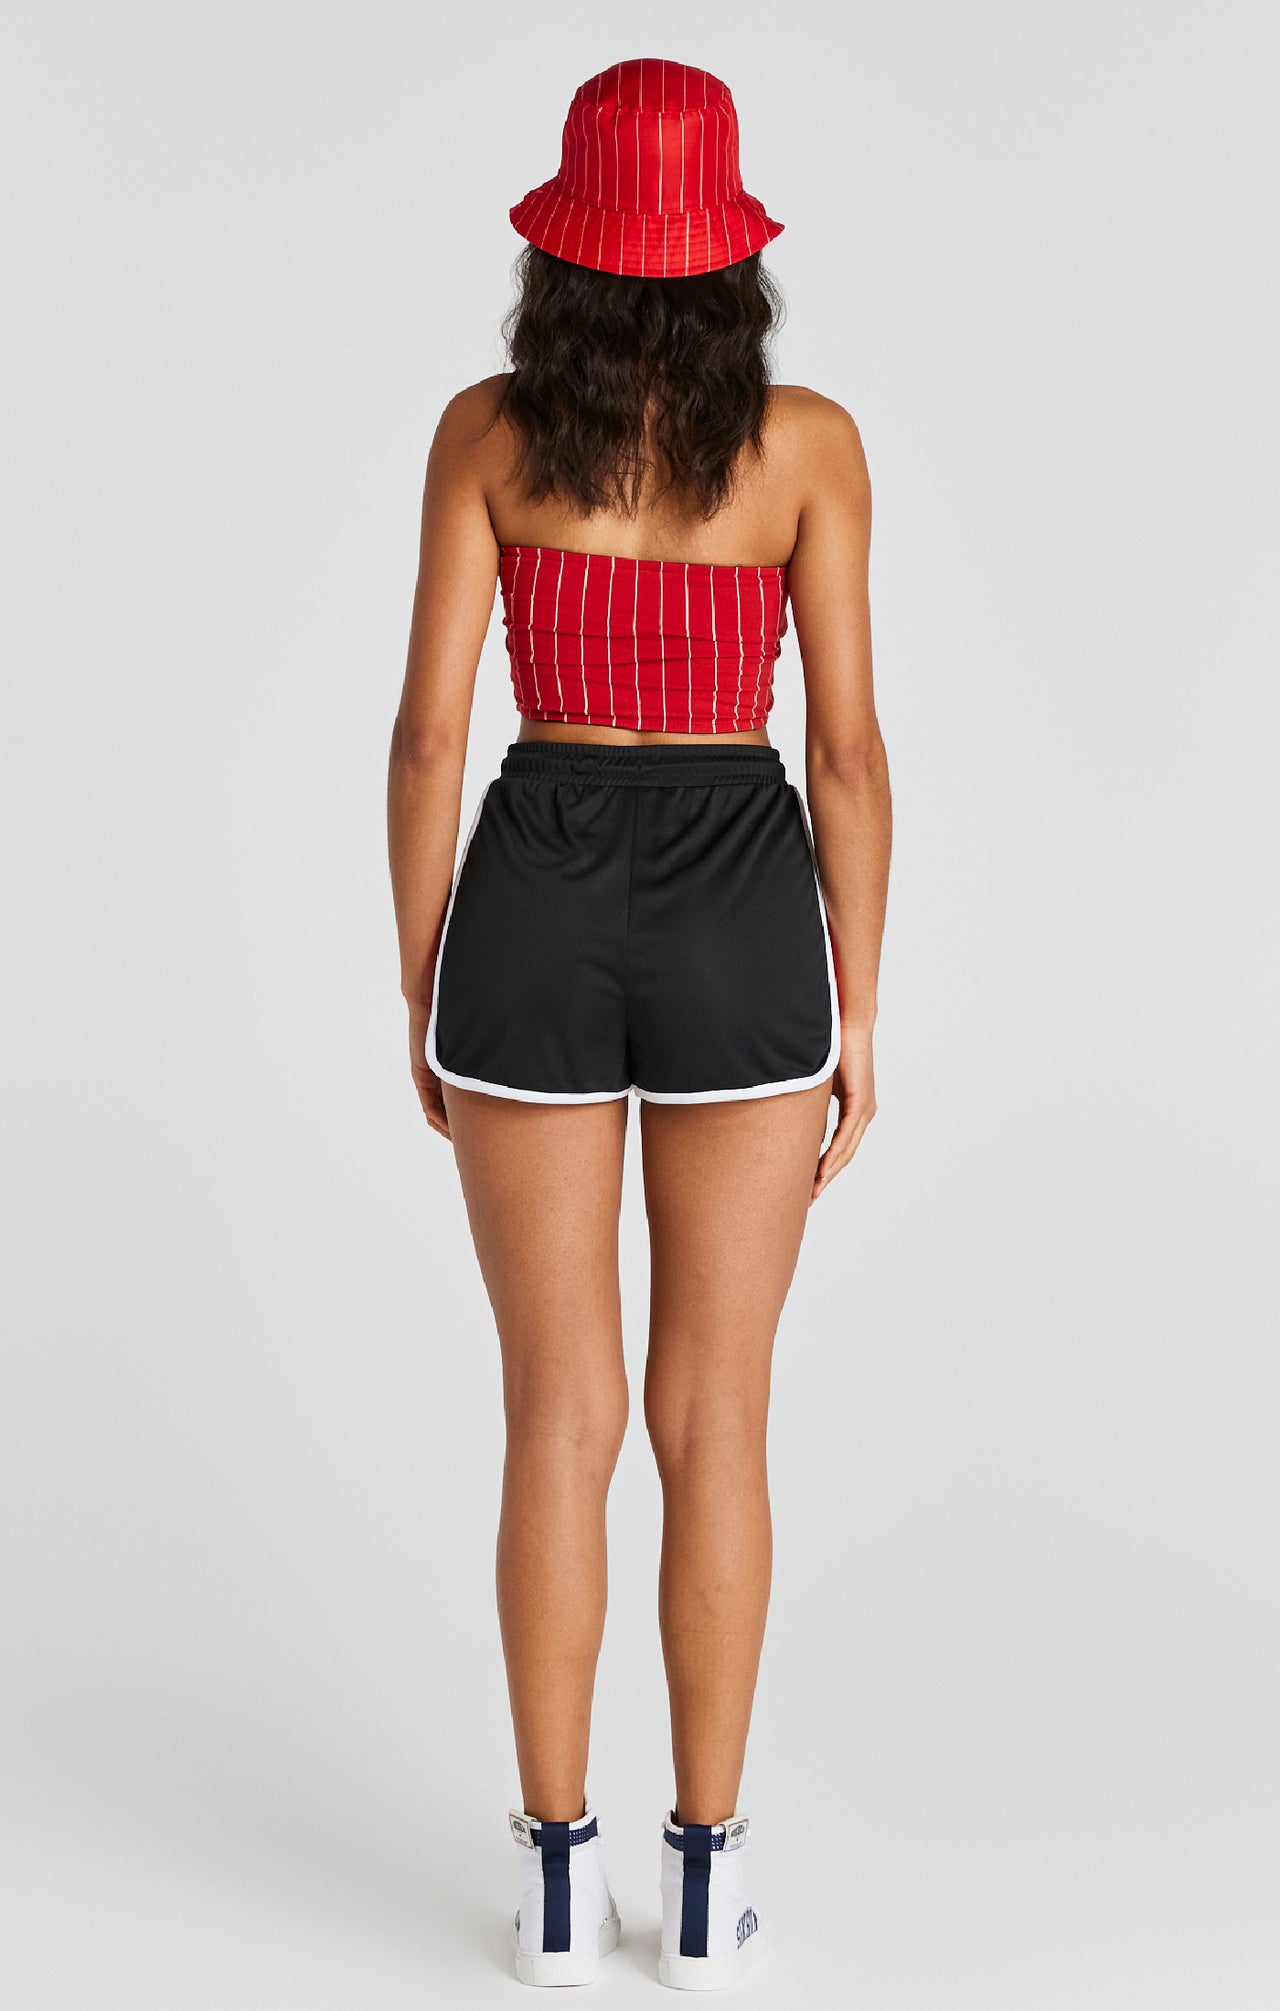 Red Pinstripe Bandeau Top (4)